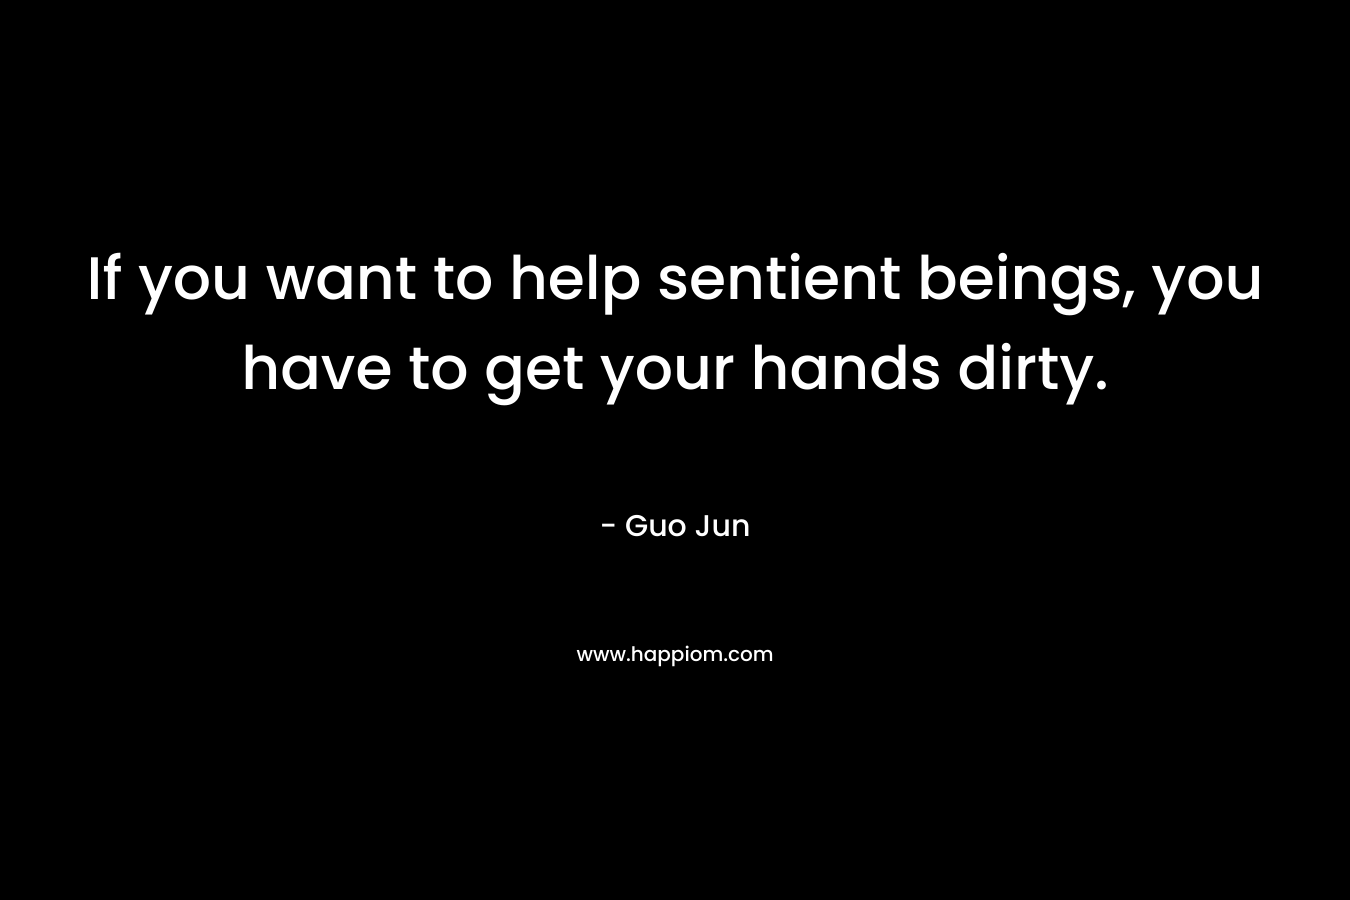 If you want to help sentient beings, you have to get your hands dirty. – Guo Jun